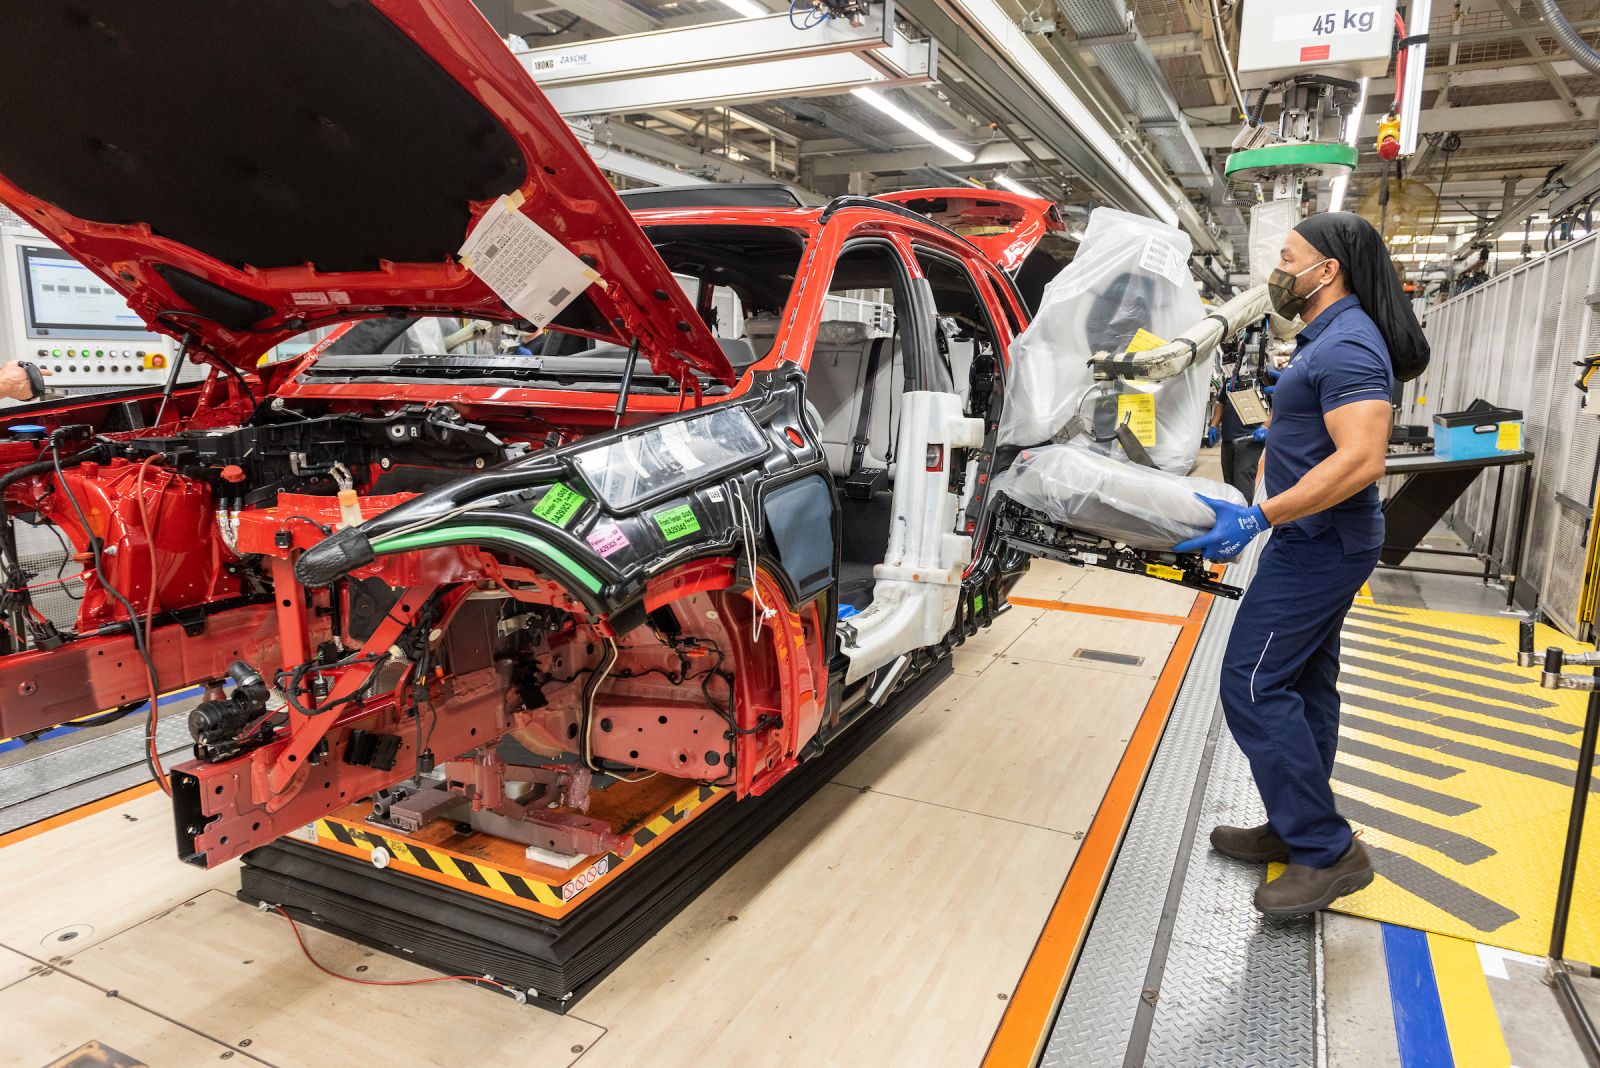 BMW continues production despite 14 confirmed COVID-19 cases. (Photo/Provided)